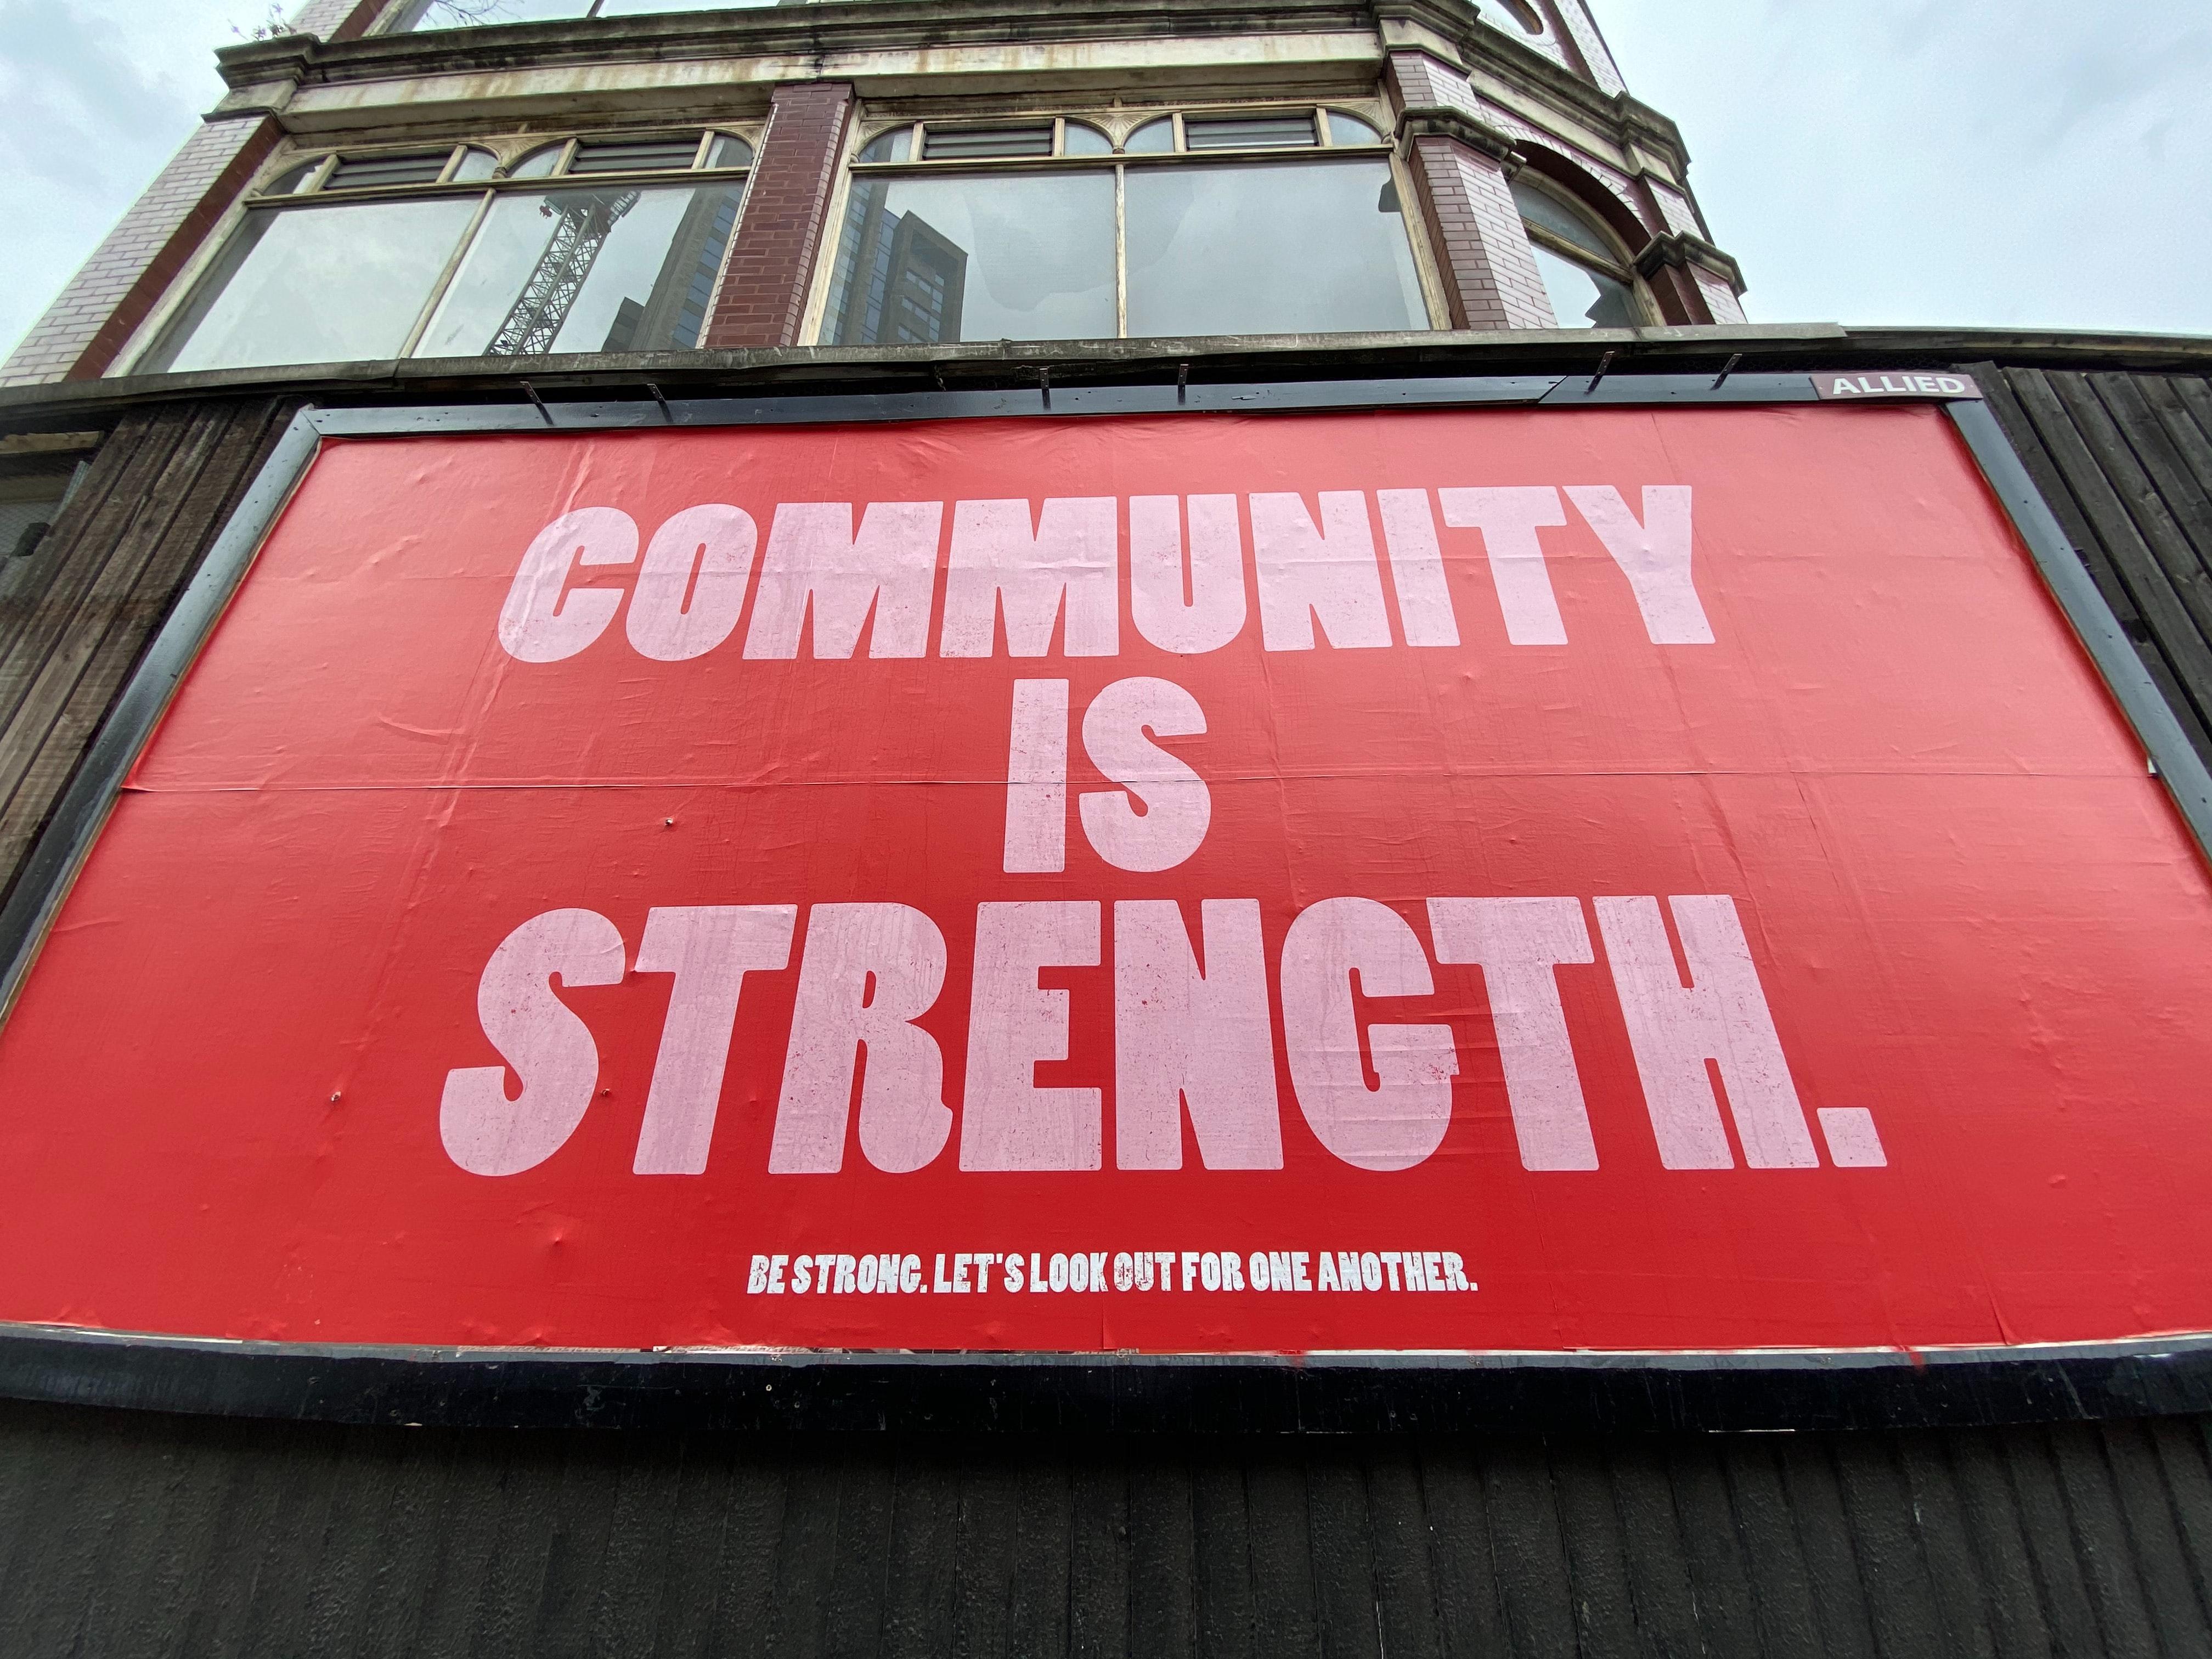 "Community is strength. Be strong. Let's look out for one another."